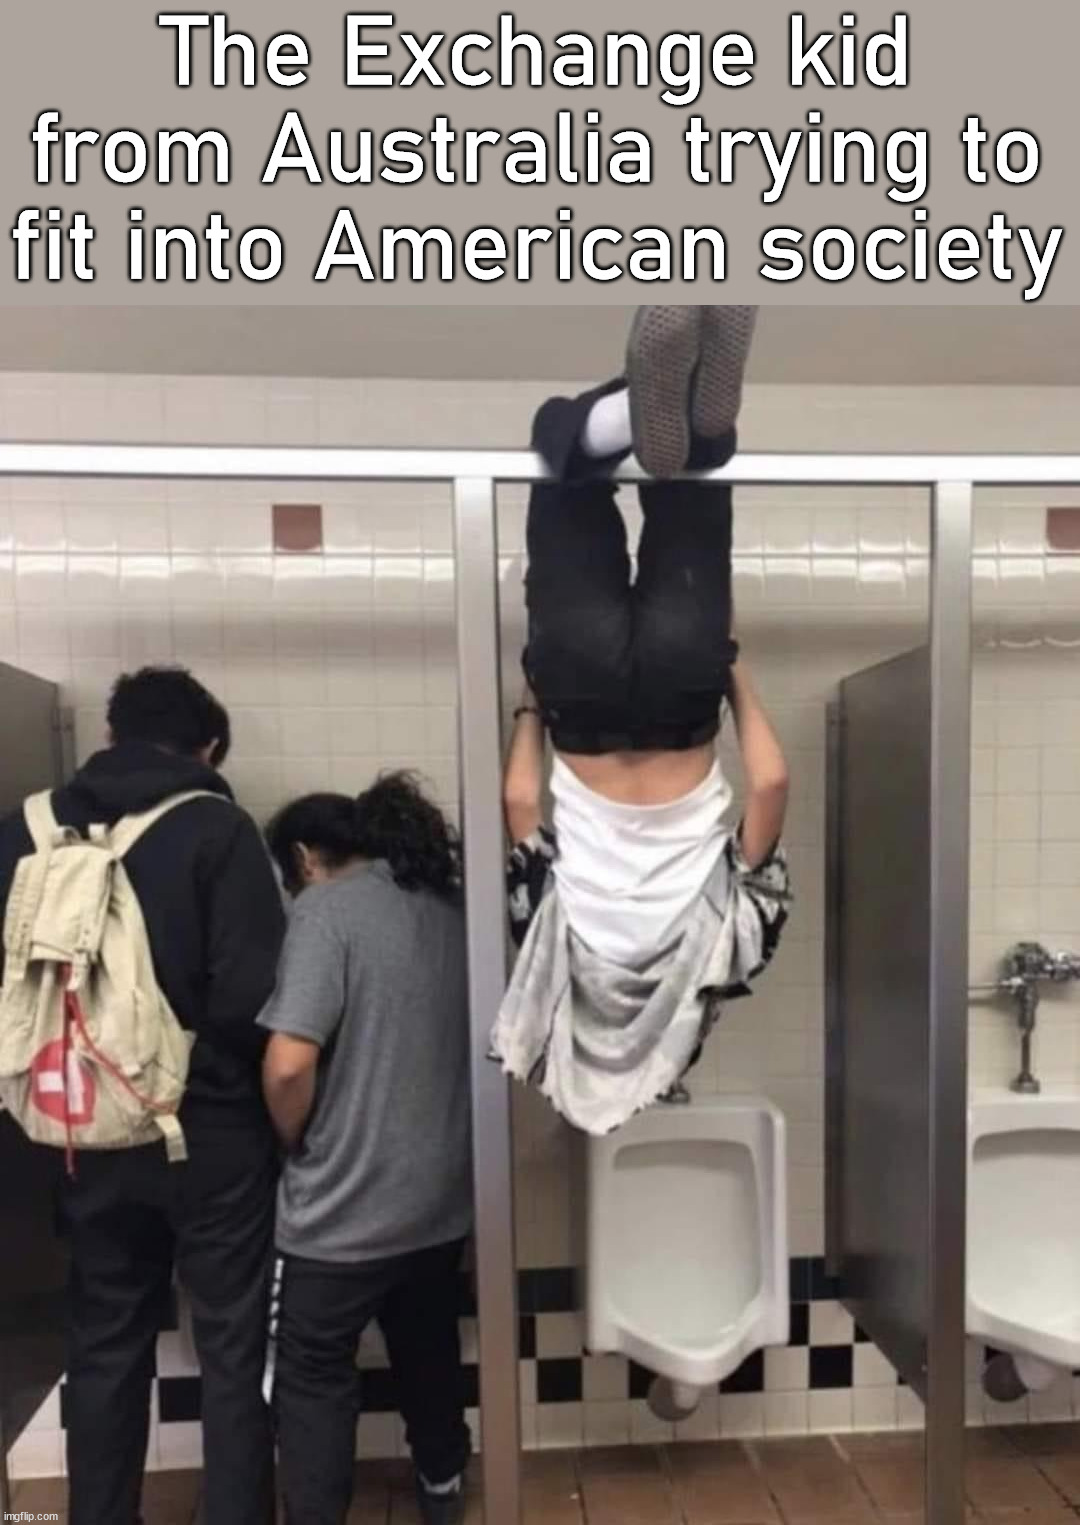 It is difficult being down under. |  The Exchange kid from Australia trying to fit into American society | image tagged in fitting in,australia,school | made w/ Imgflip meme maker